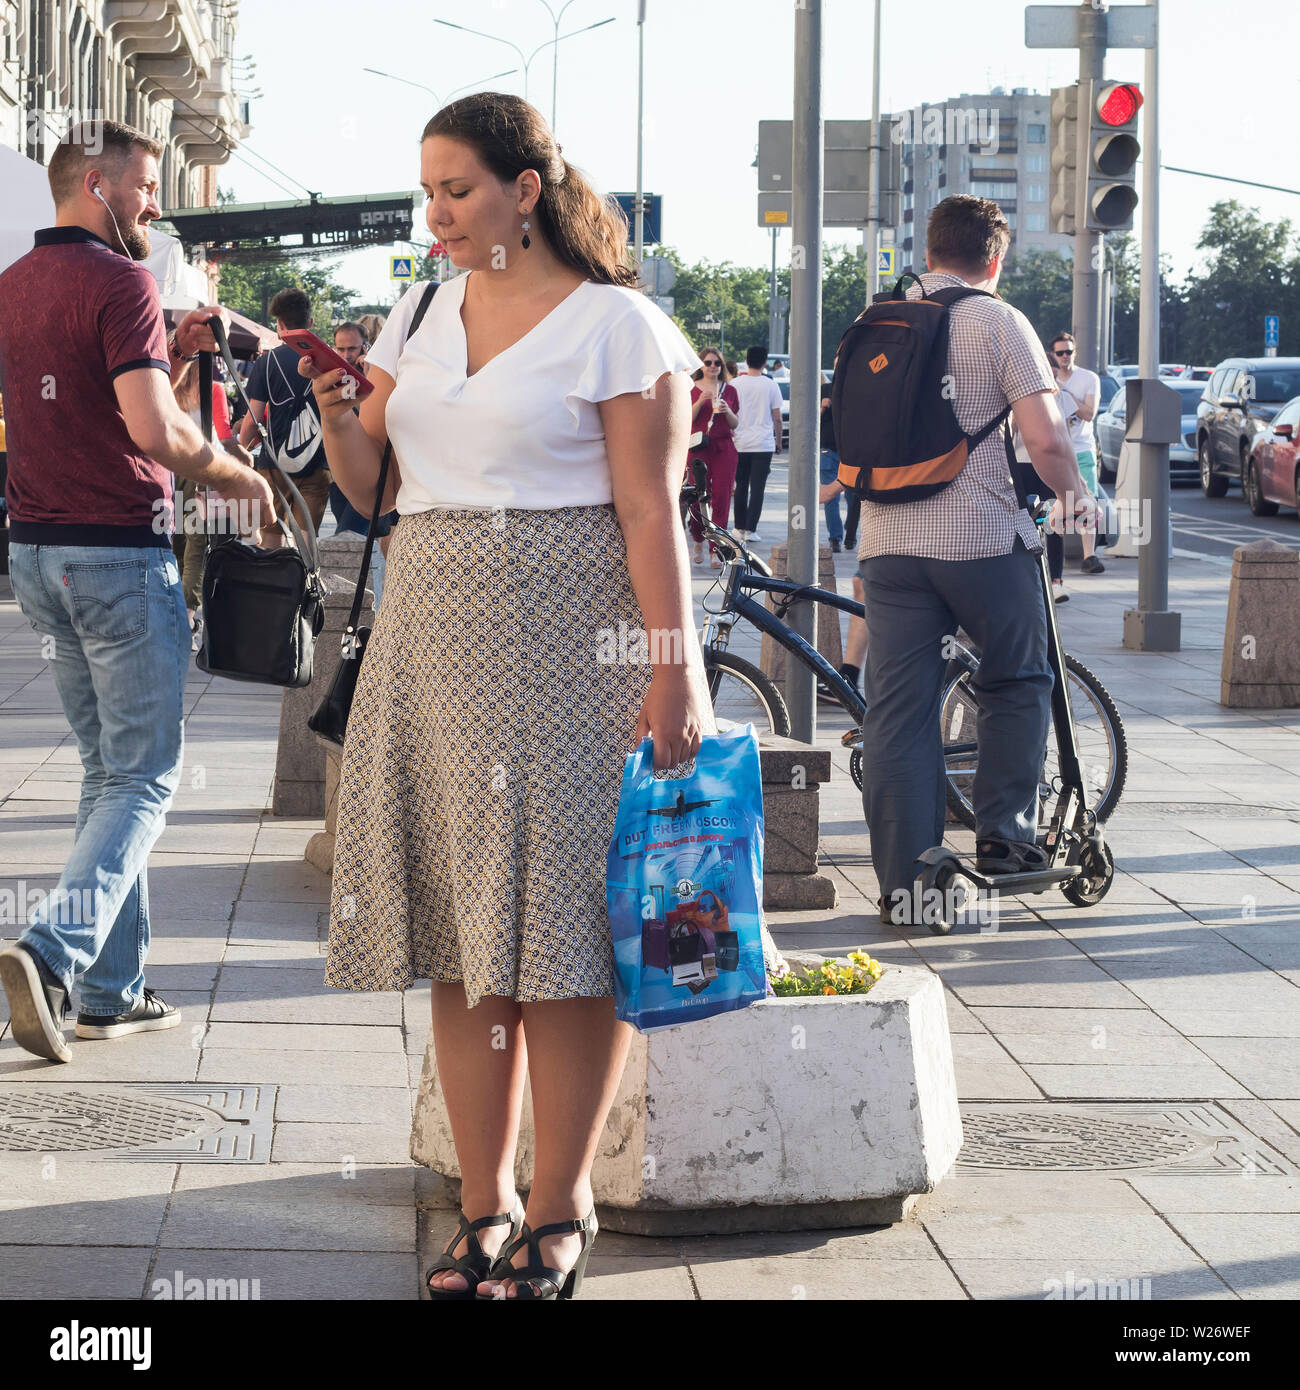 Moscow, RUSSIA - July 2, 2019 girl with long hair in a white blouse and a plaid skirt is waiting for friends Stock Photo